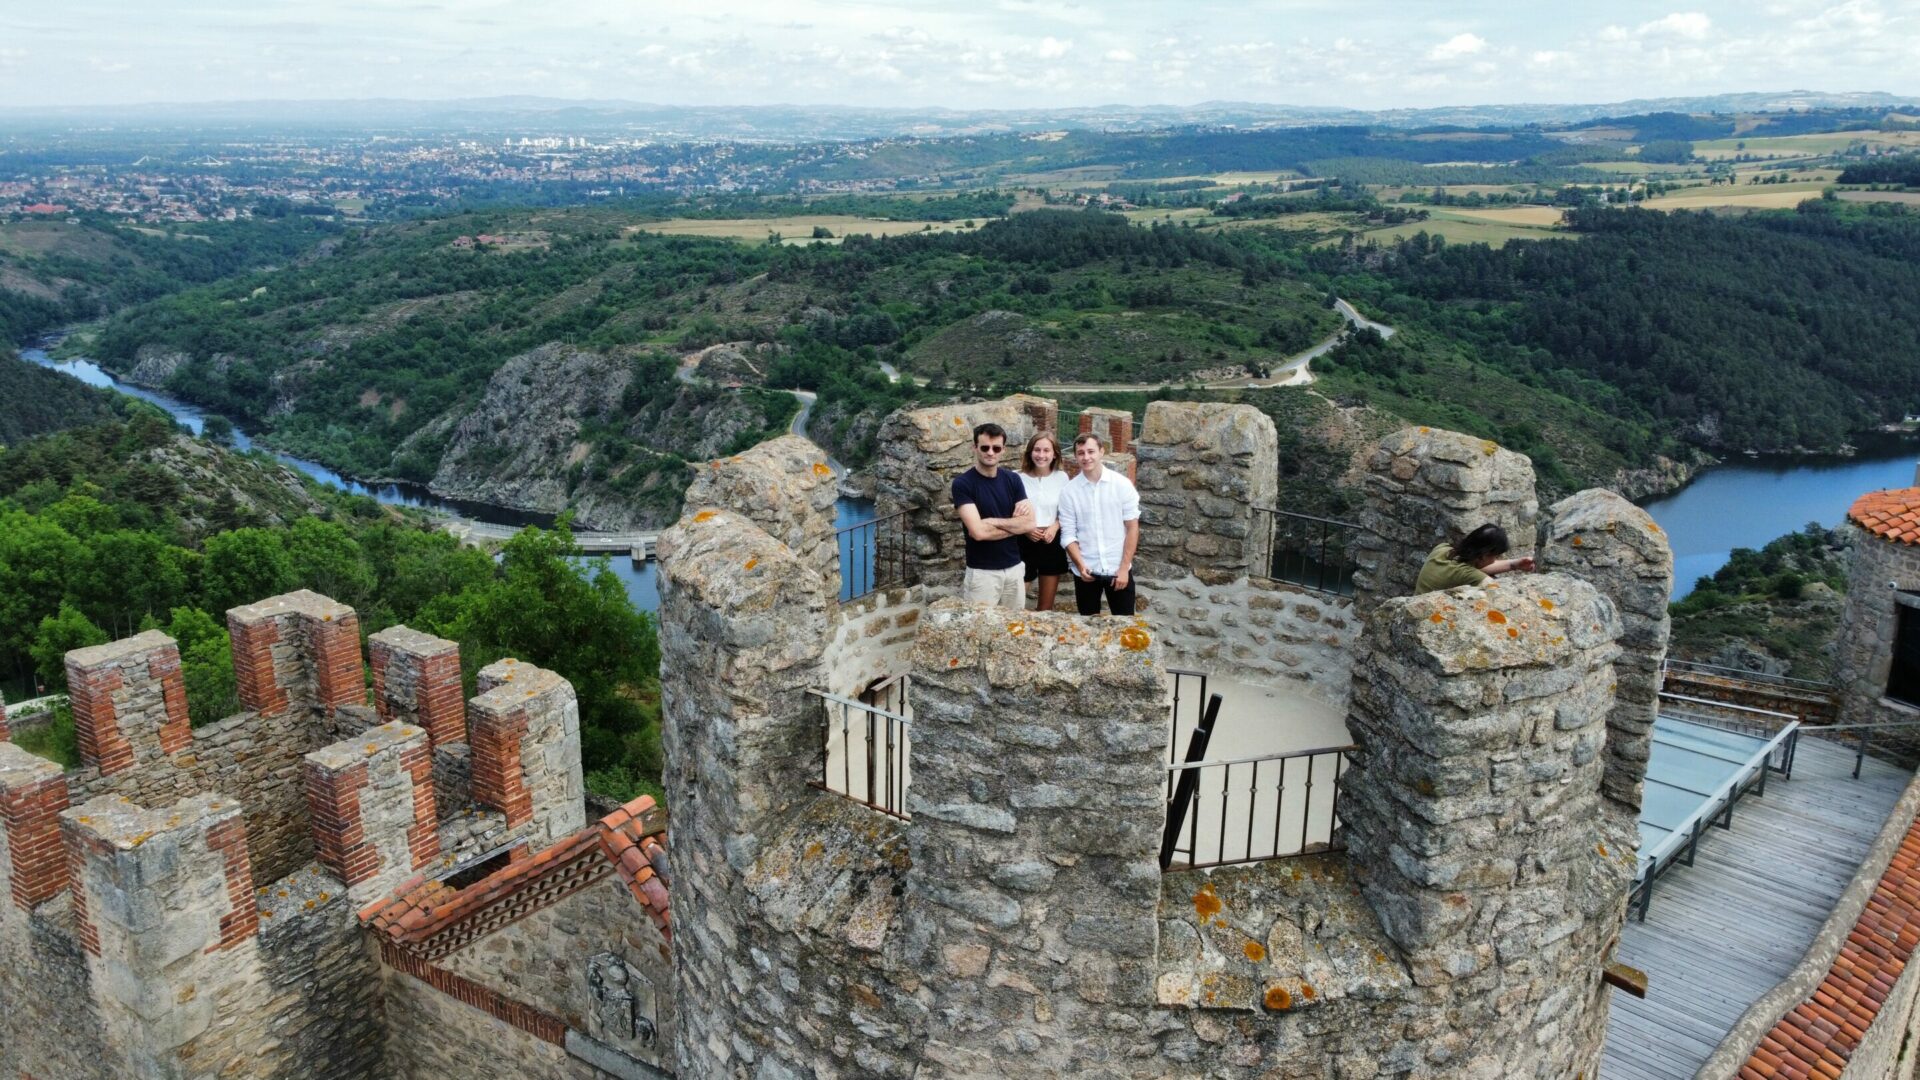 I used my drone to take a photo of us from on top of a castle!